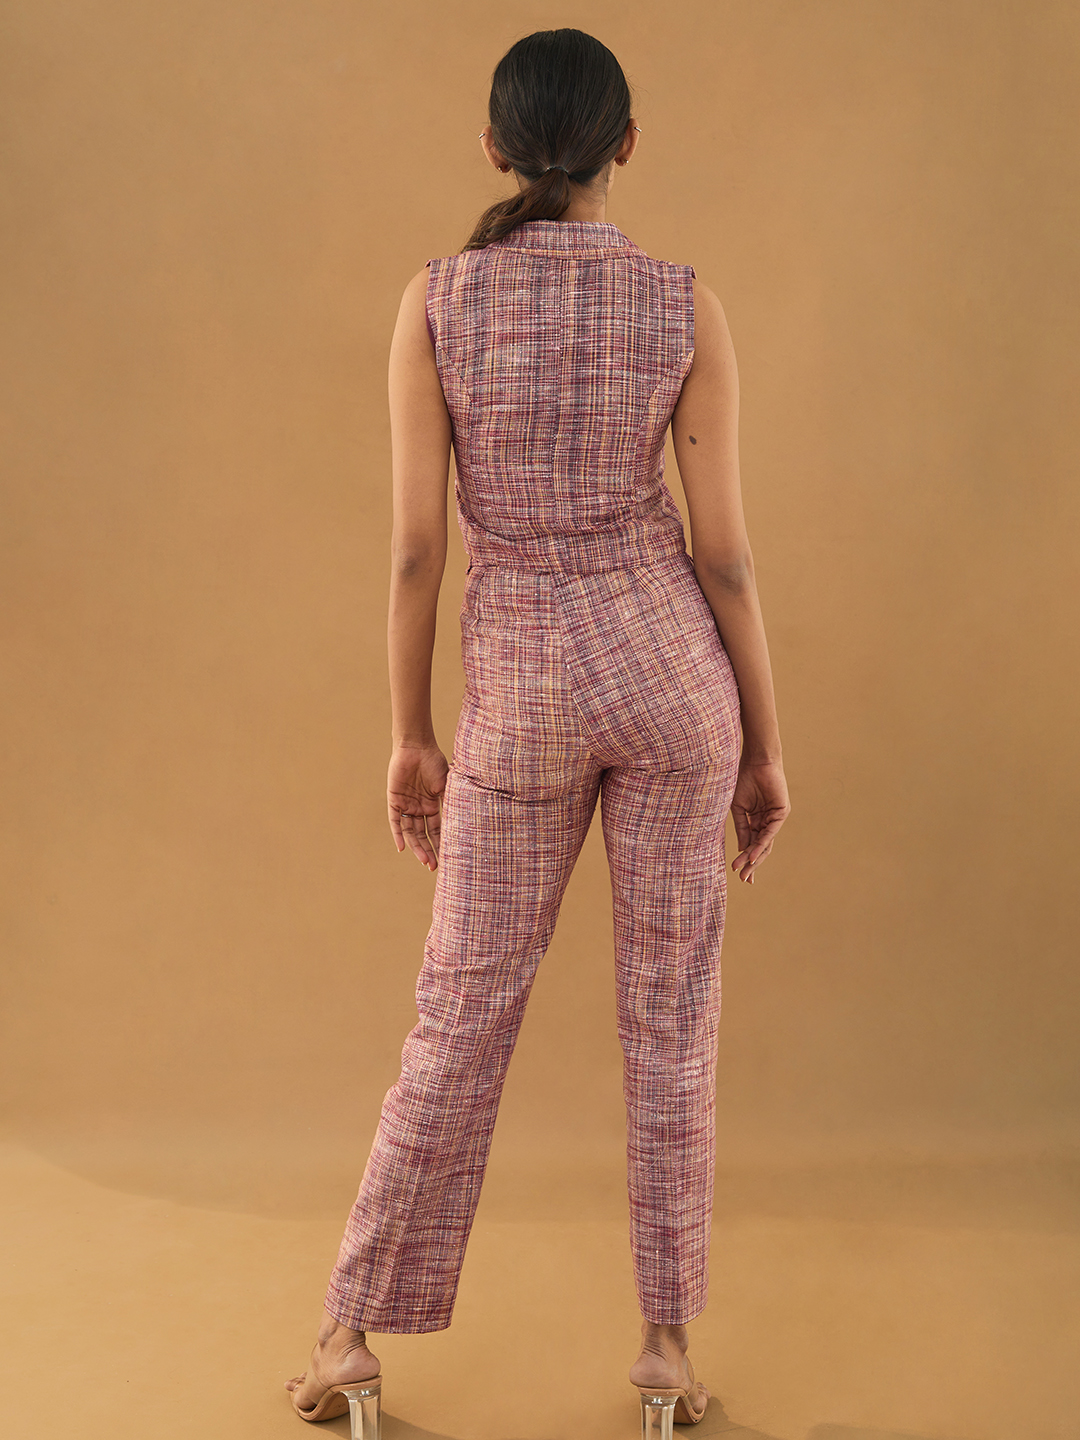 Women's Trousers inc Tailored & High Waisted Trousers | Oh Polly UK-anthinhphatland.vn